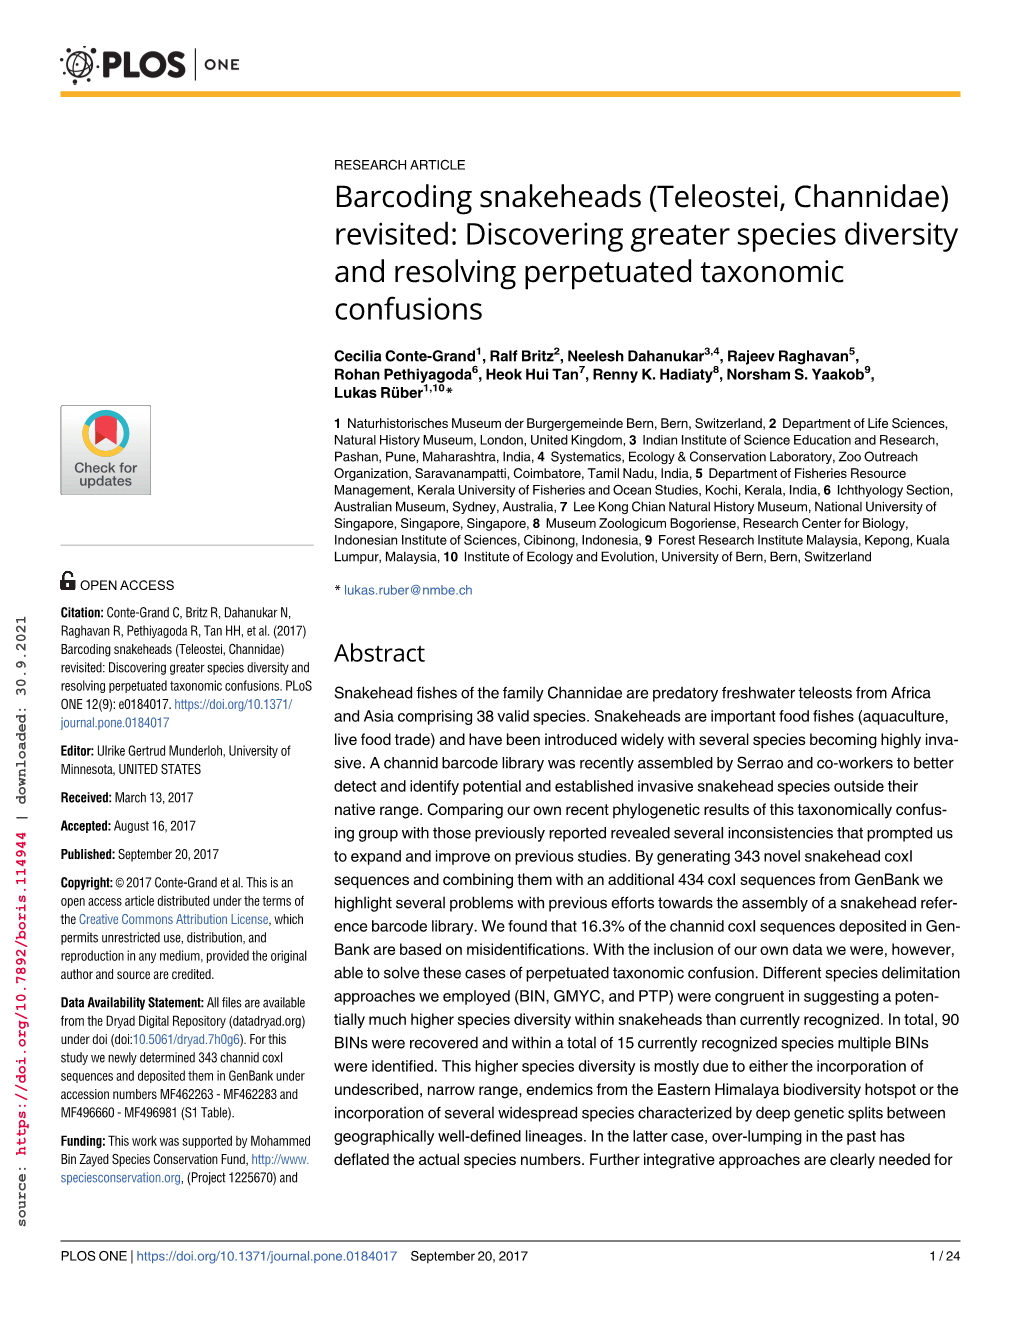 Barcoding Snakeheads (Teleostei, Channidae) Revisited